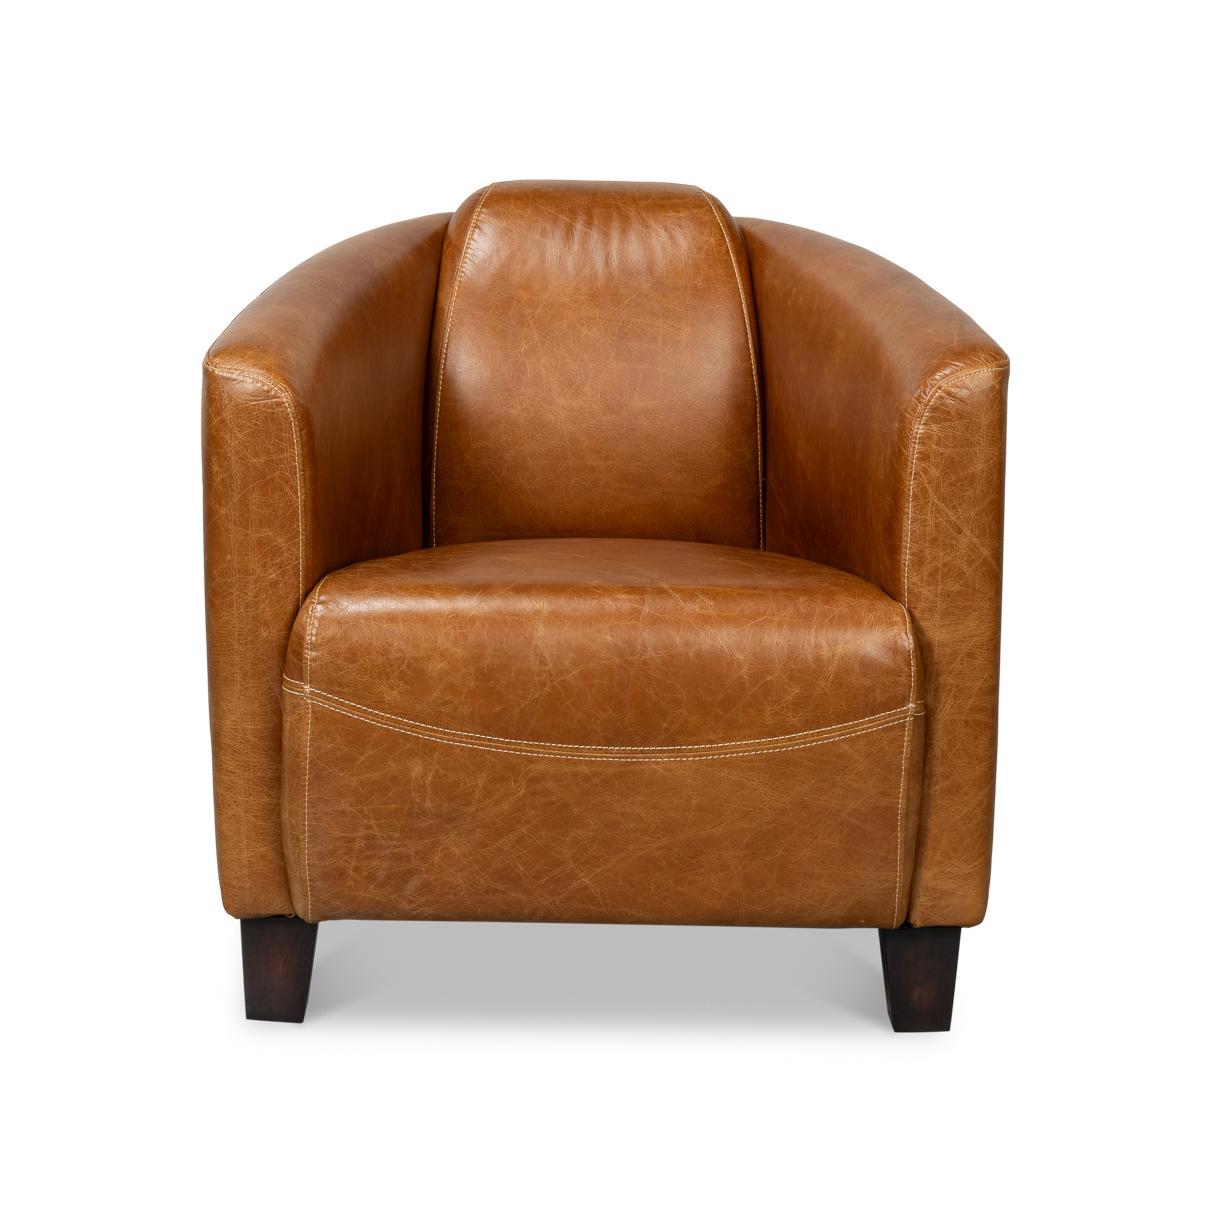 Crafted of luxurious top grain leather in warm brown color, this stylish and comfortable chair is perfect for your den, library, or living room.

Color variation is common and acceptable on vintage leather. 

Dimensions: 28